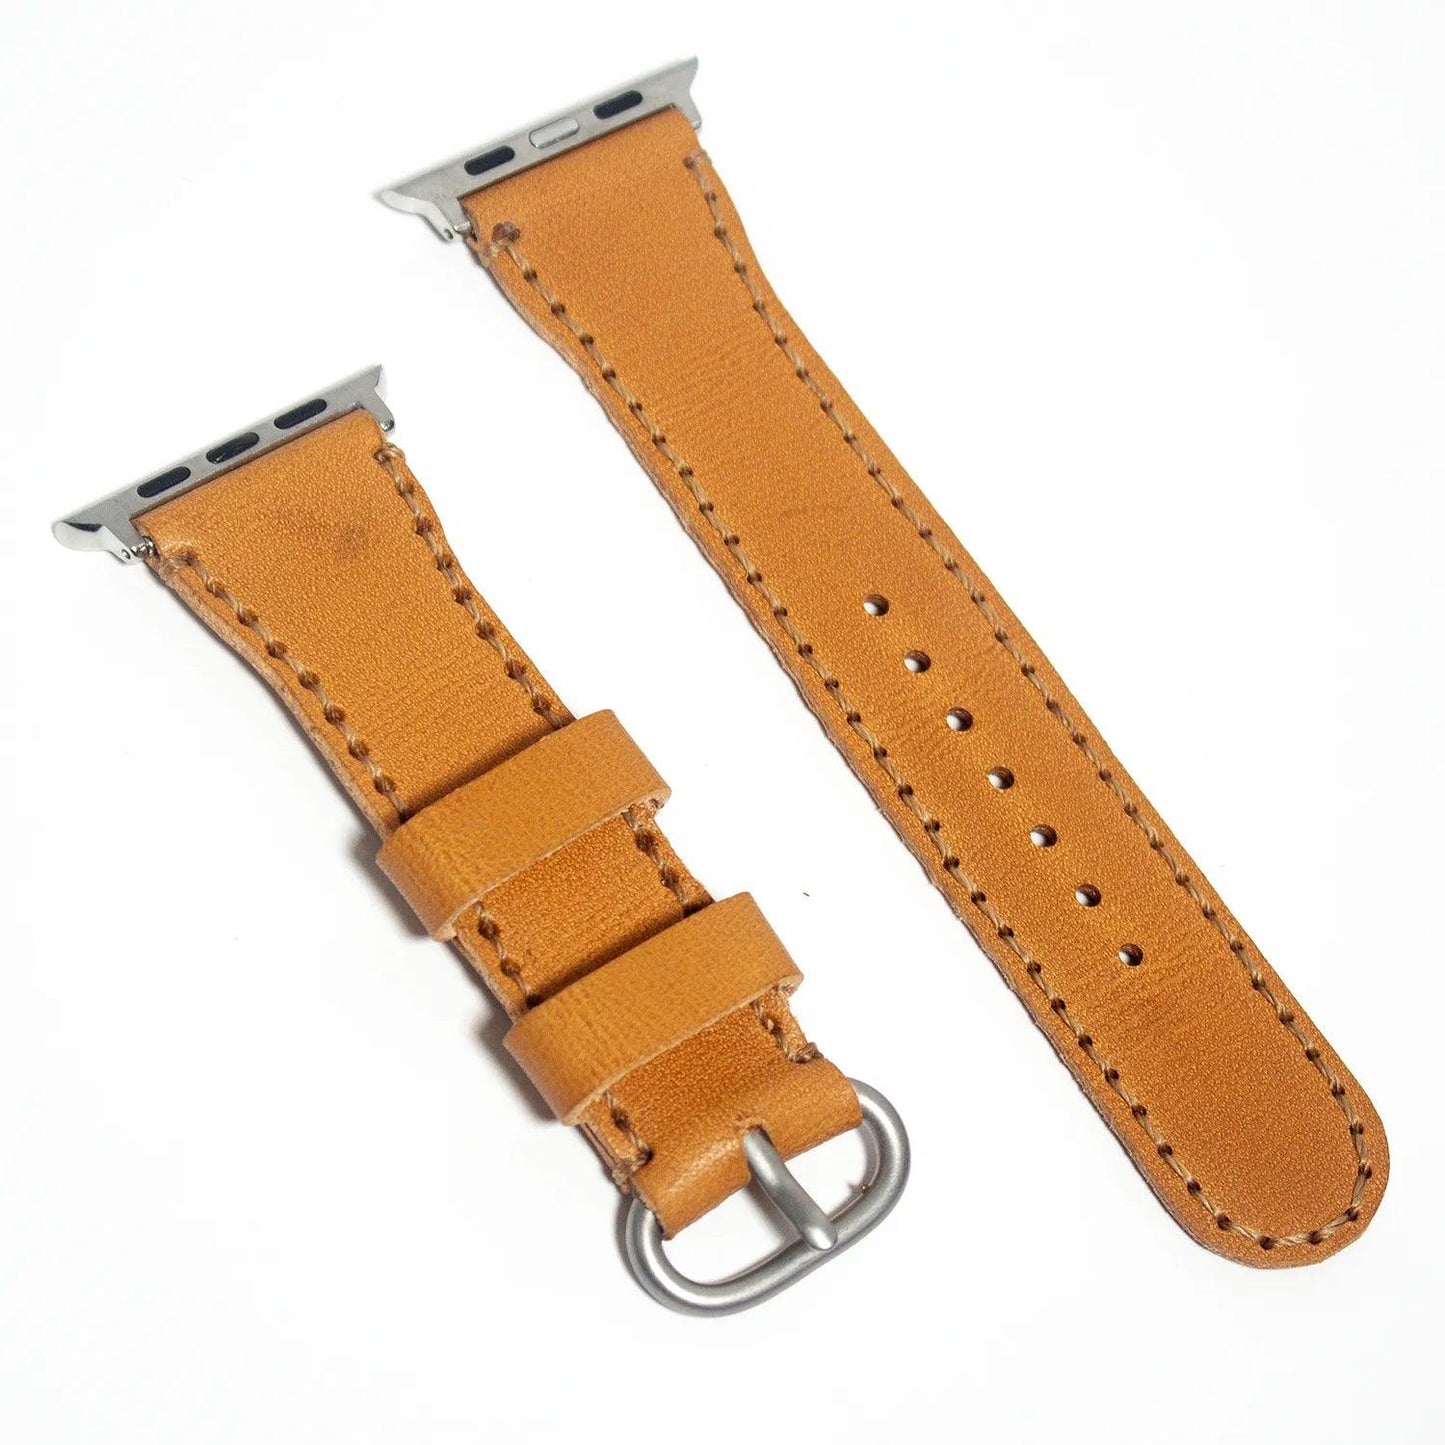 Fashion-forward leather watch bands made from light orange Buttero leather, ideal for those who appreciate vibrant style.